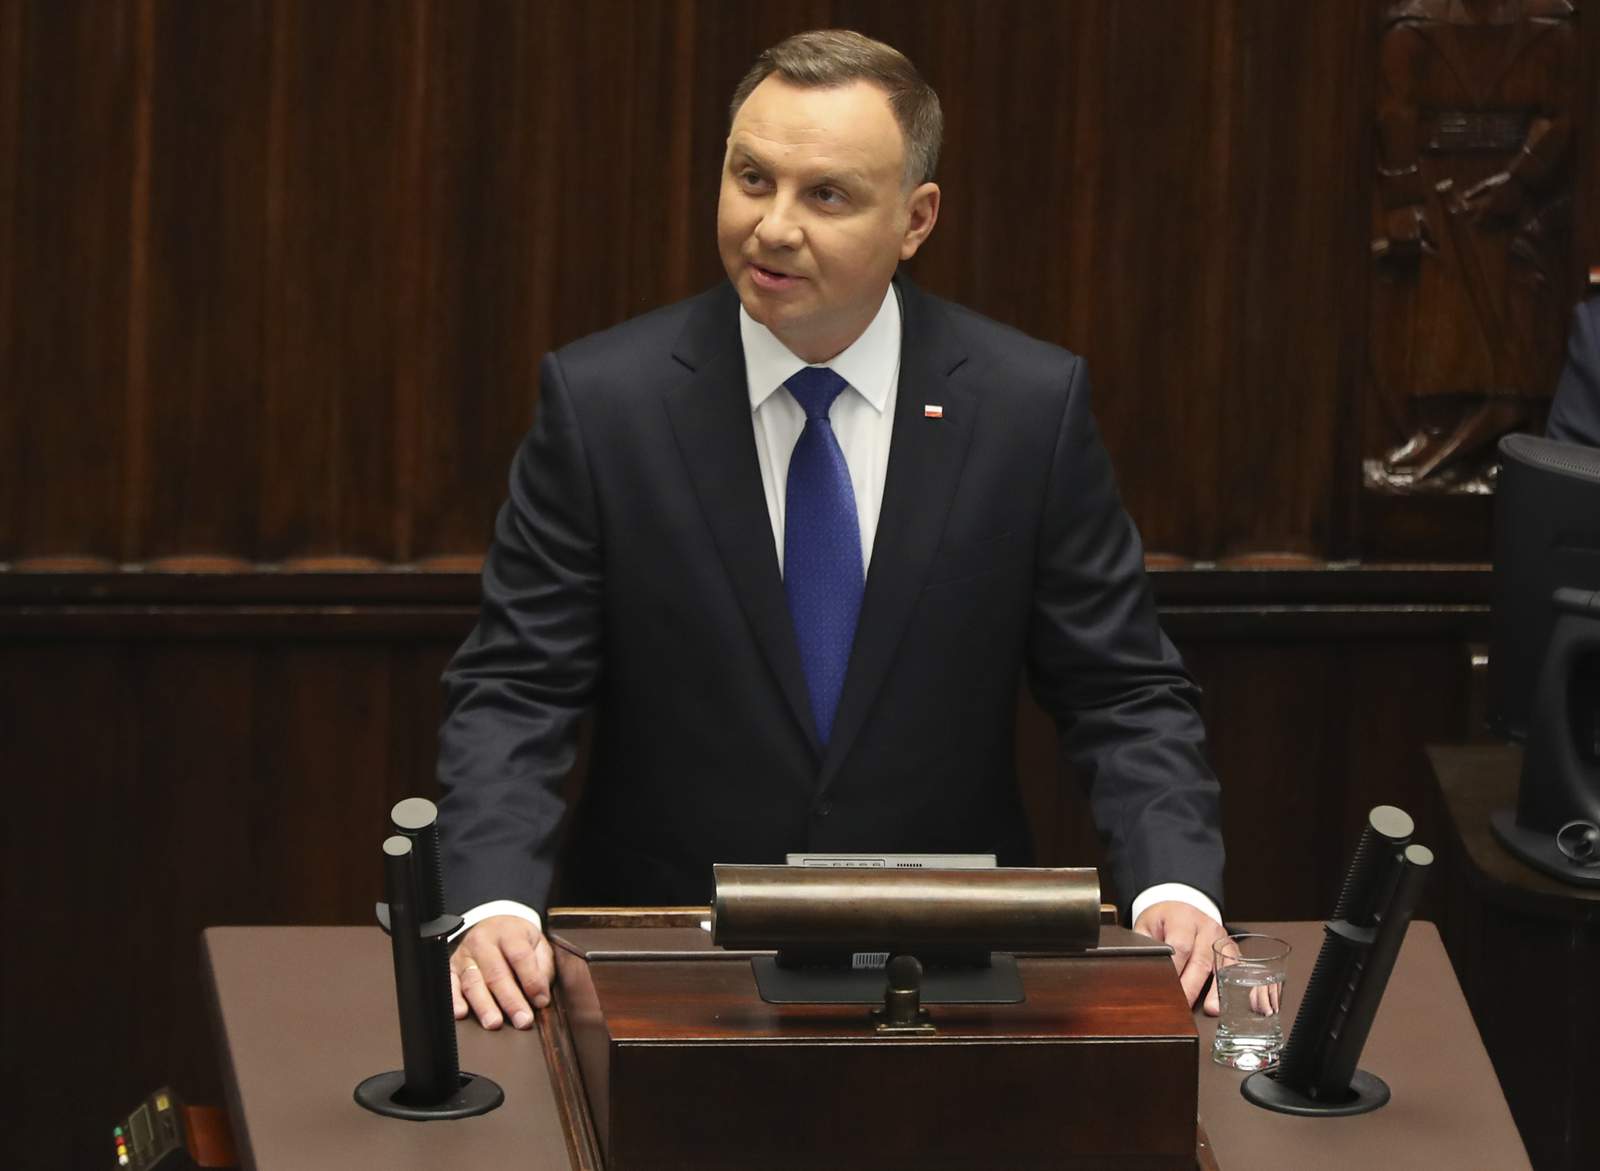 Poland criticized in EU Parliament over courts, LGBT rights